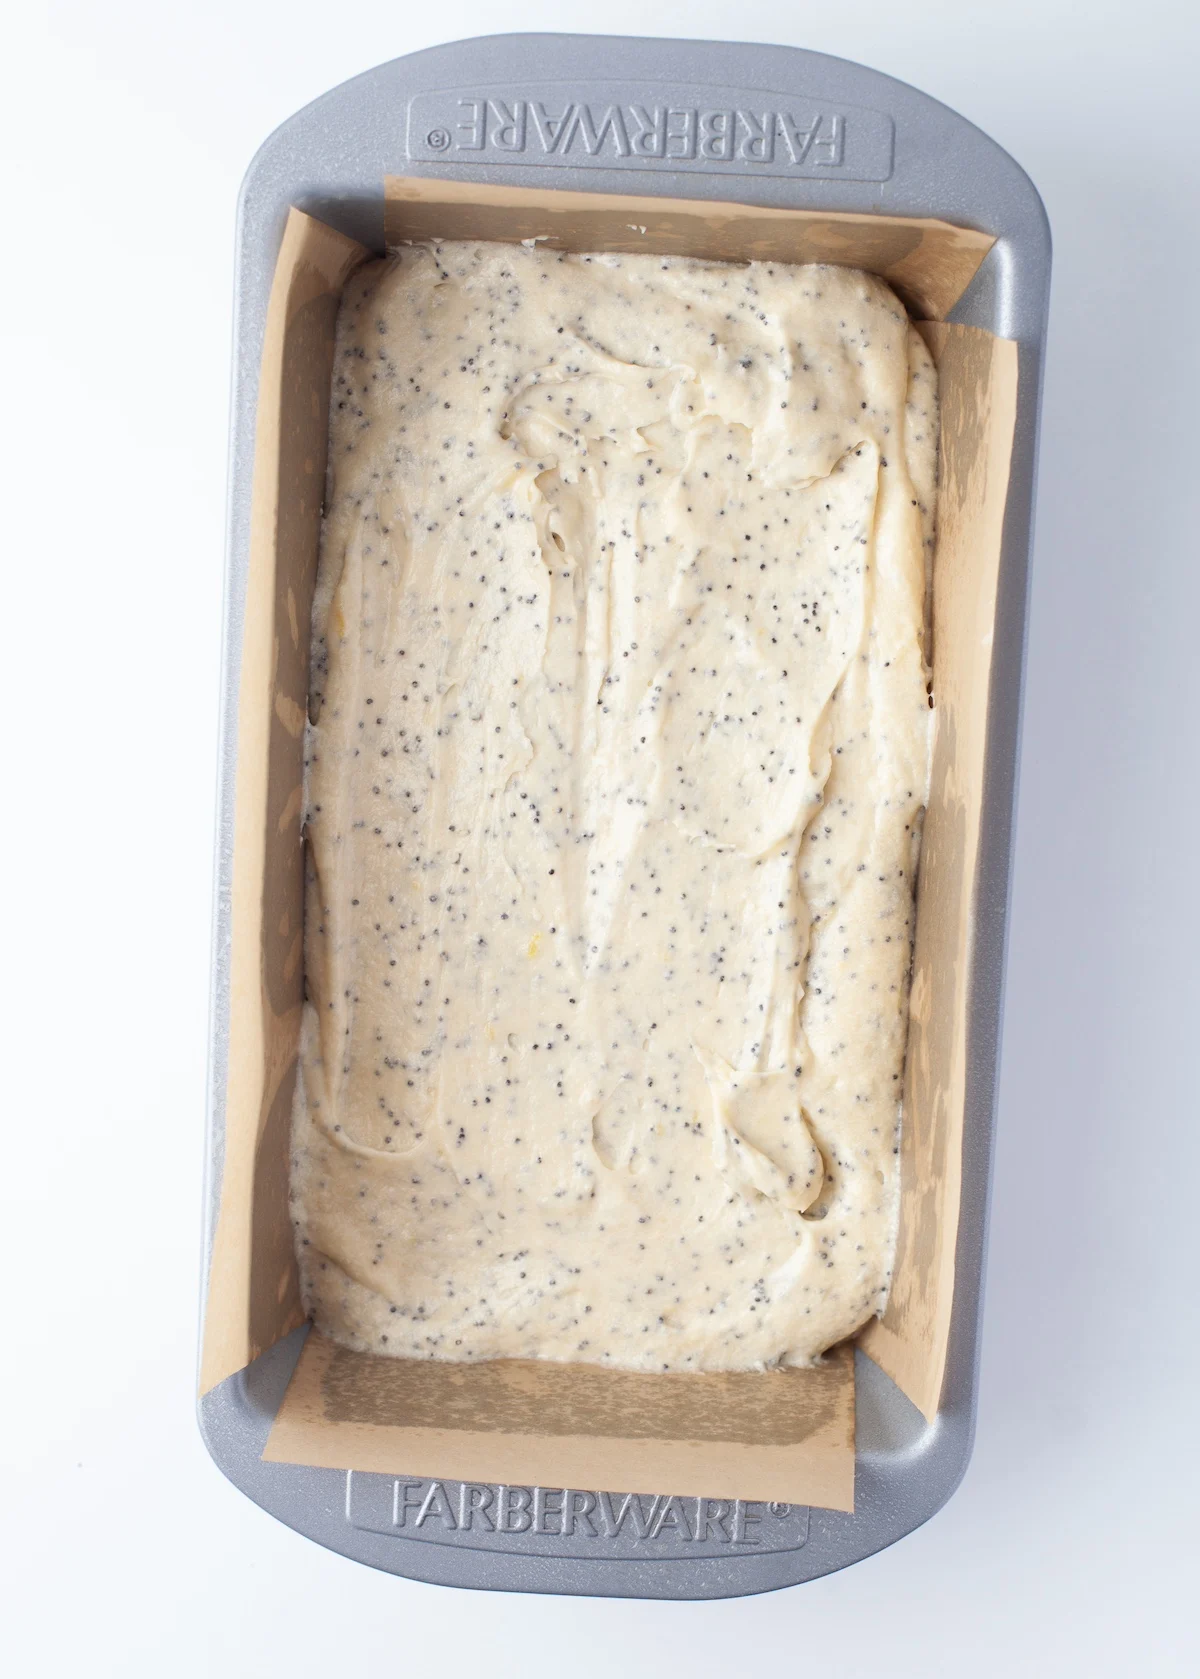 Lemon poppy seed batter added to a loaf pan